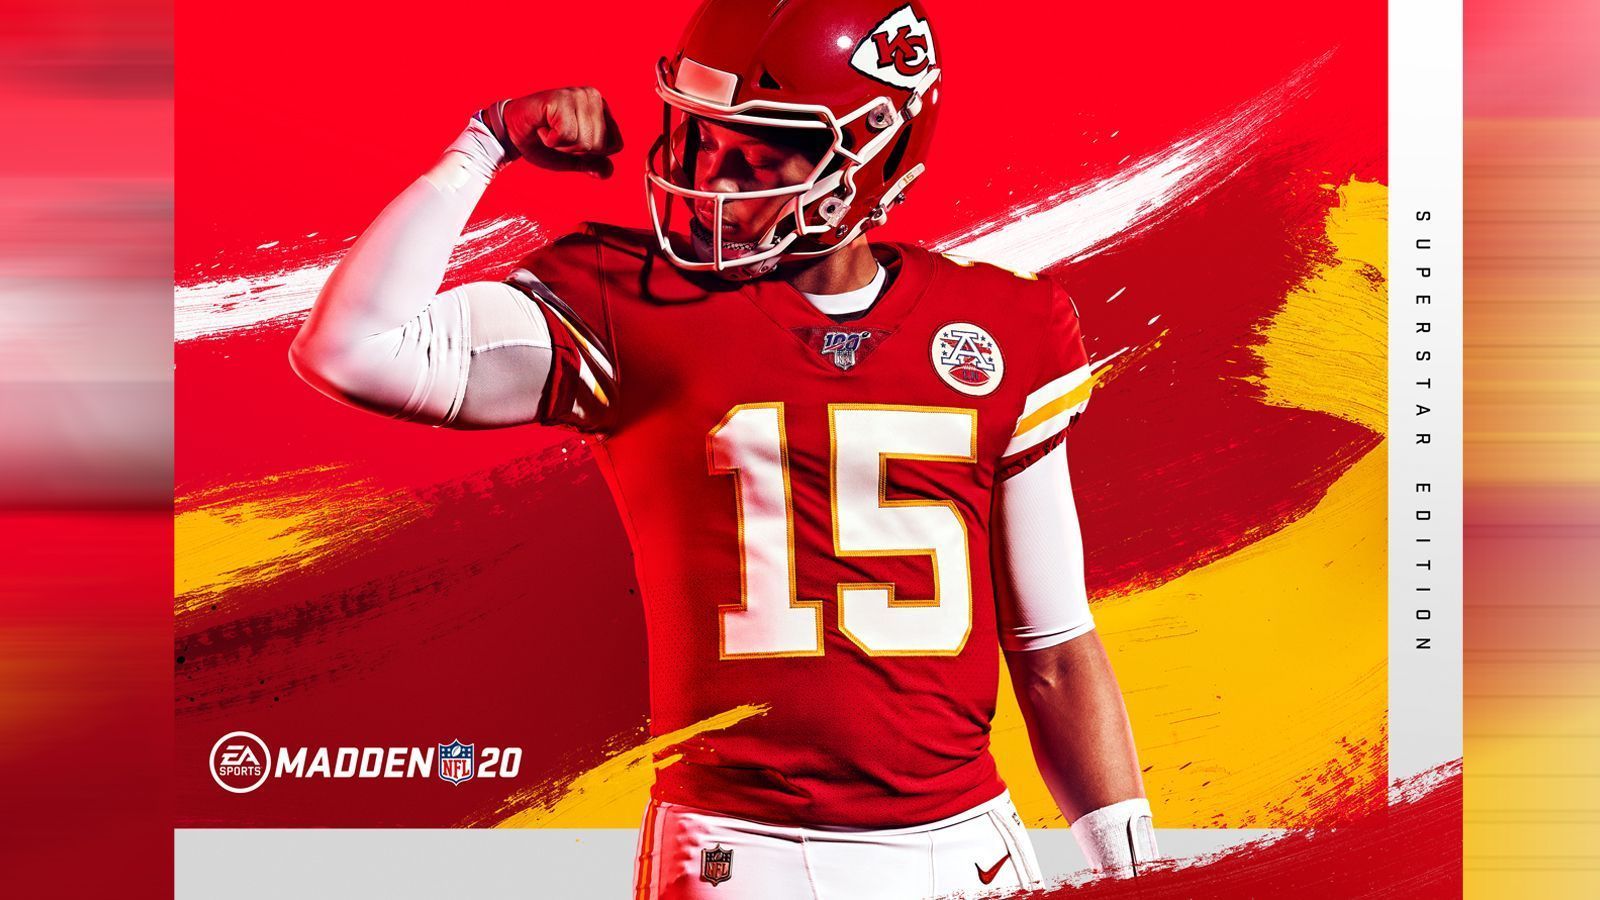 
                <strong>Madden NFL 20</strong><br>
                Madden NFL 20 - Cover-Spieler: Patrick Mahomes.
              